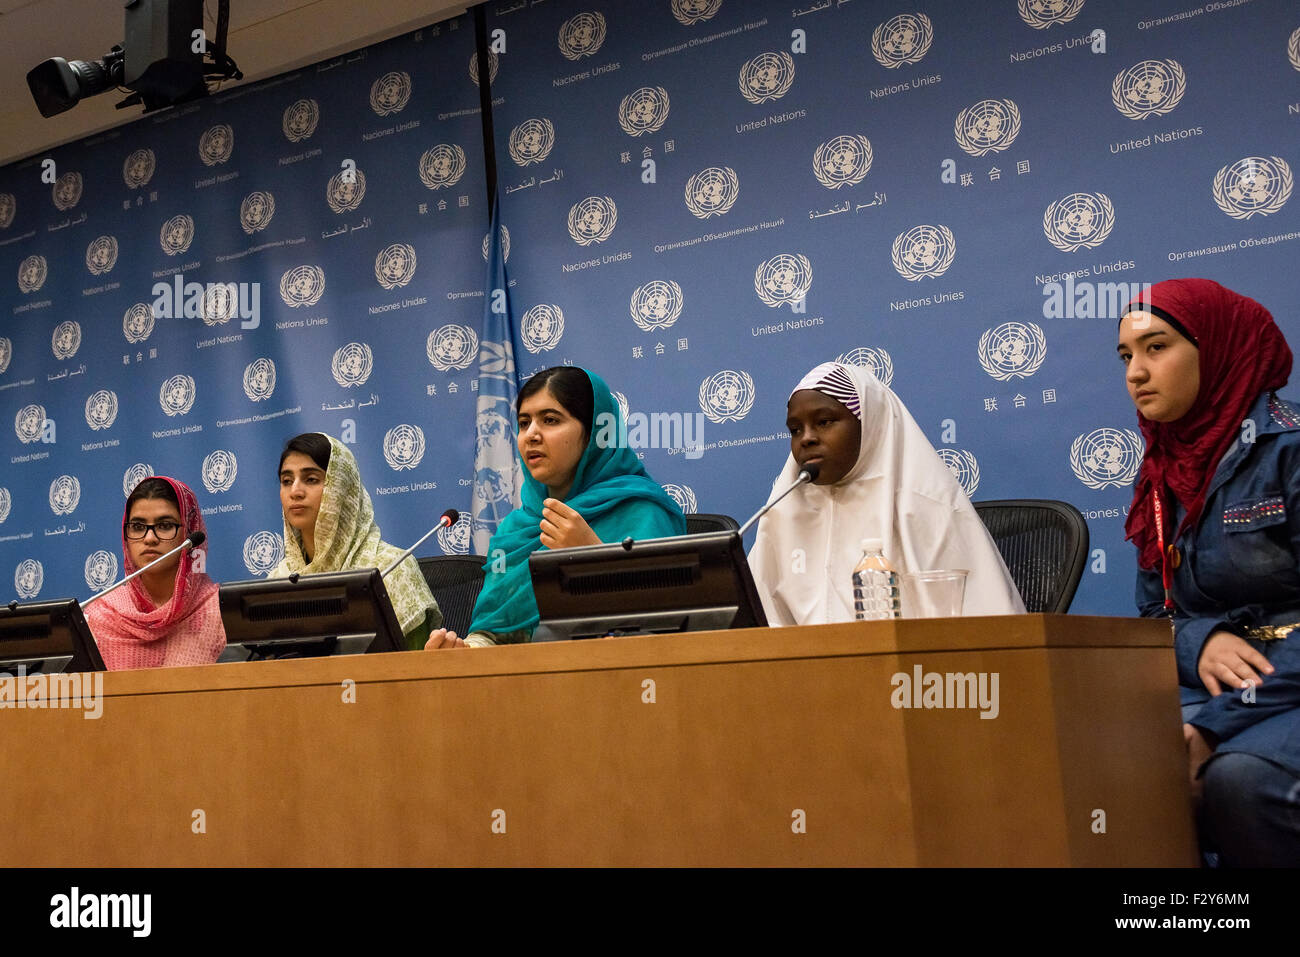 New York, United States. 22nd Sep, 2015. Malala Yousafzai (center), accompanied by four other young women, spoke at a press conference at the United Nations, emphasizing the need to expand educational opportunities in Pakistan. © Albin Lohr-Jones/Pacific Press/Alamy Live News Stock Photo